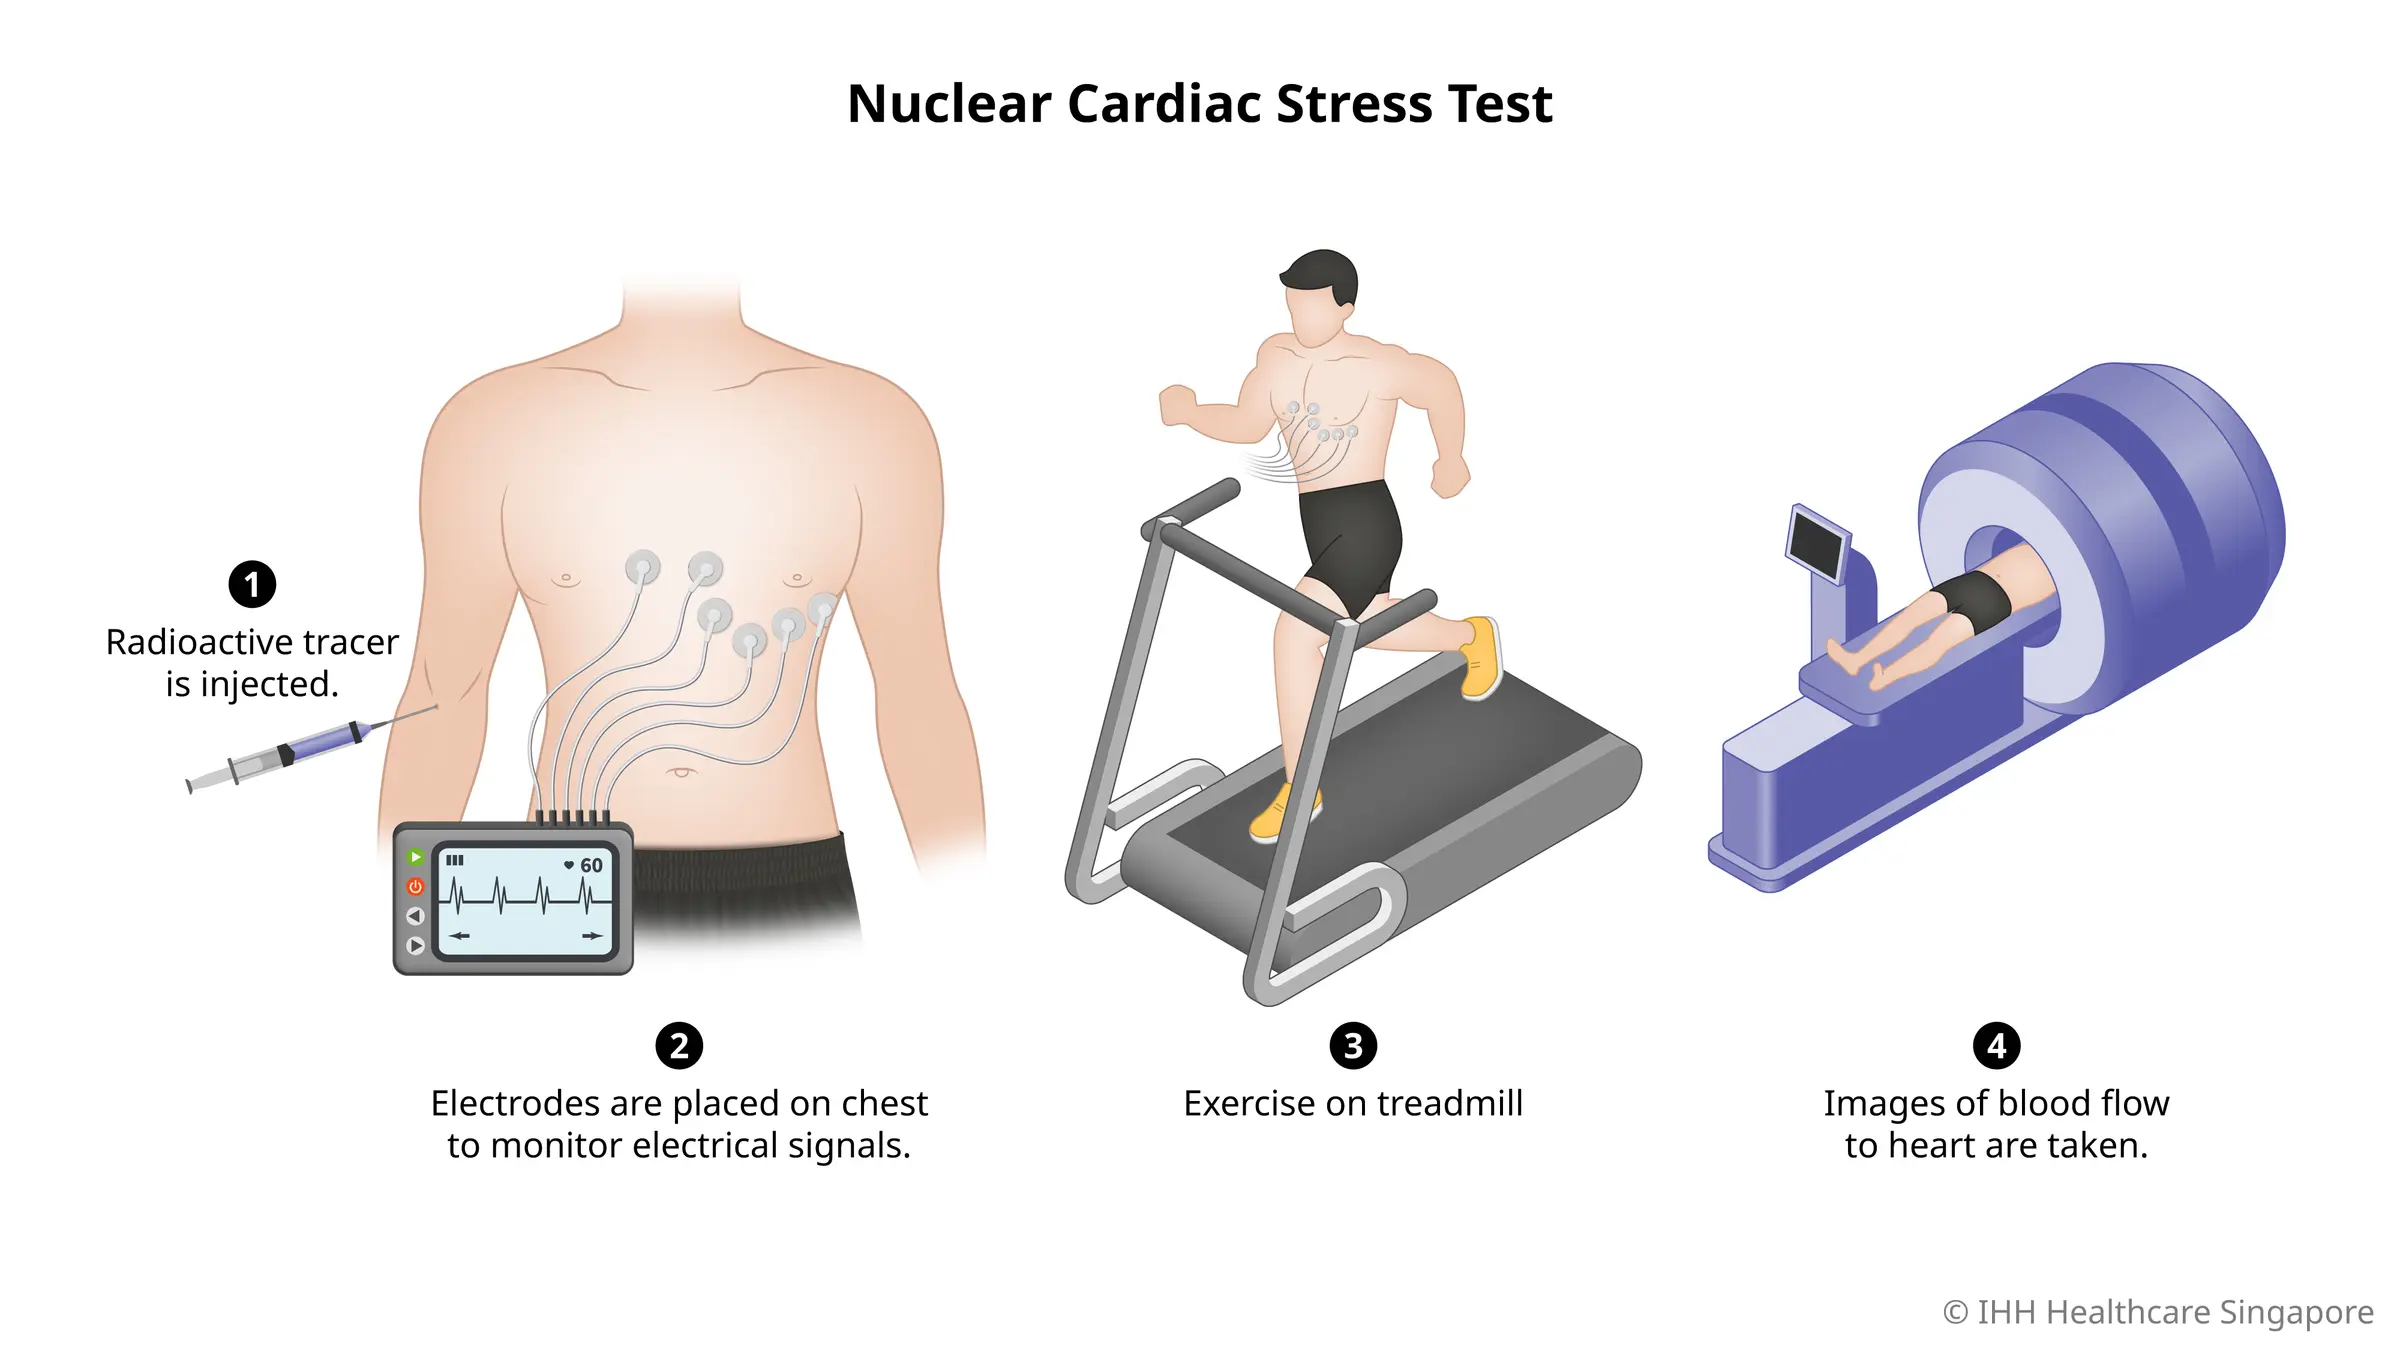 A nuclear cardiac stress test uses a radioactive tracer to assess blood flow to your heart muscles during exercise and rest.